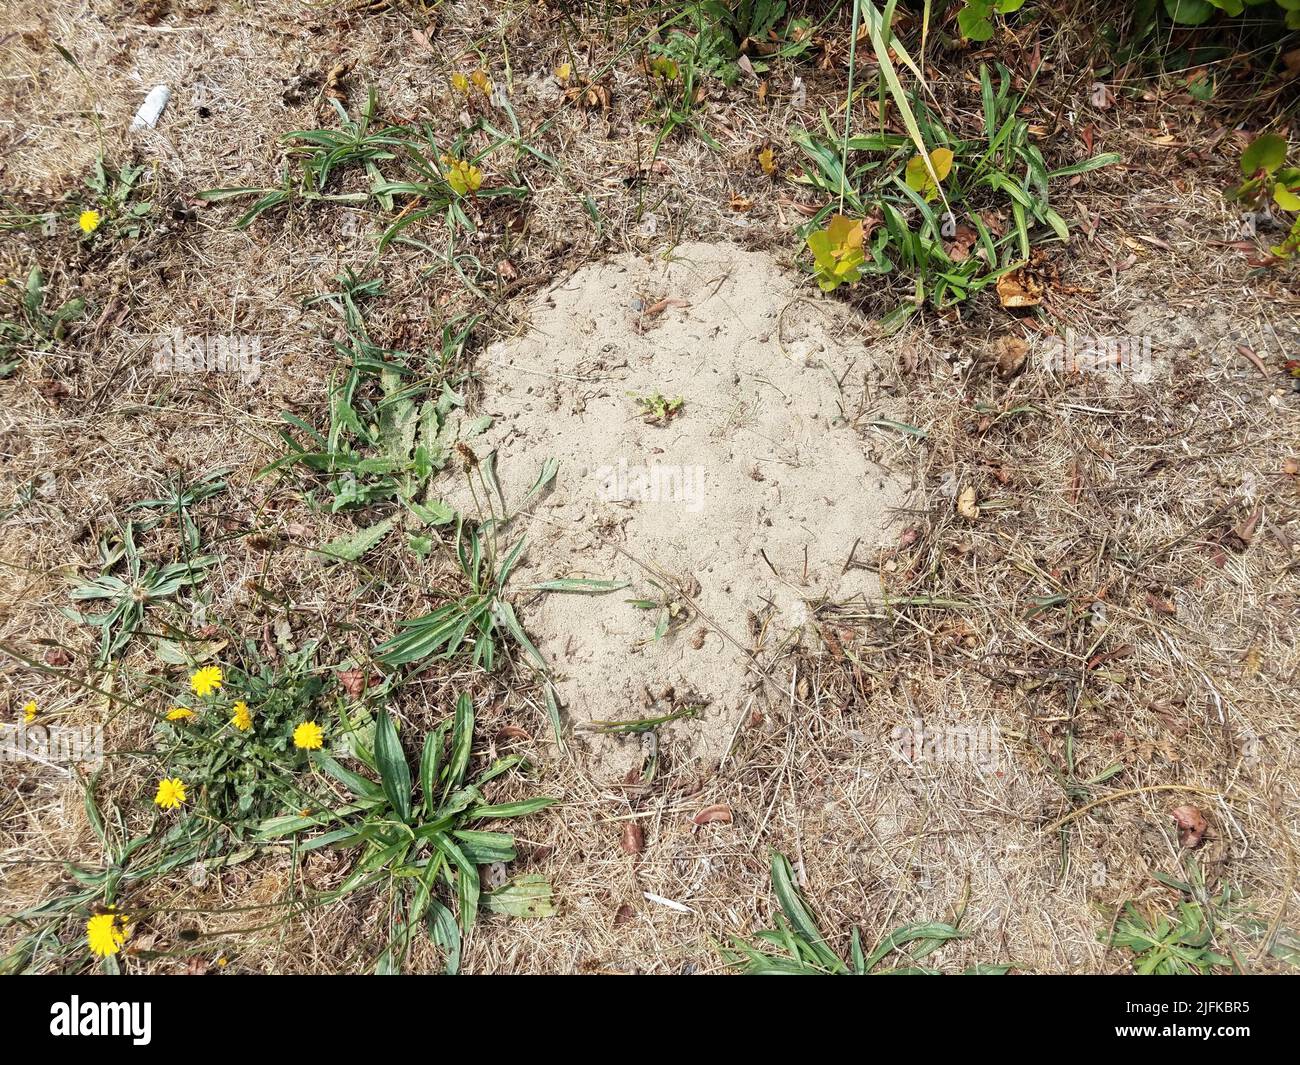 brown grass or lawn with weeds and ant hill mound. Stock Photo